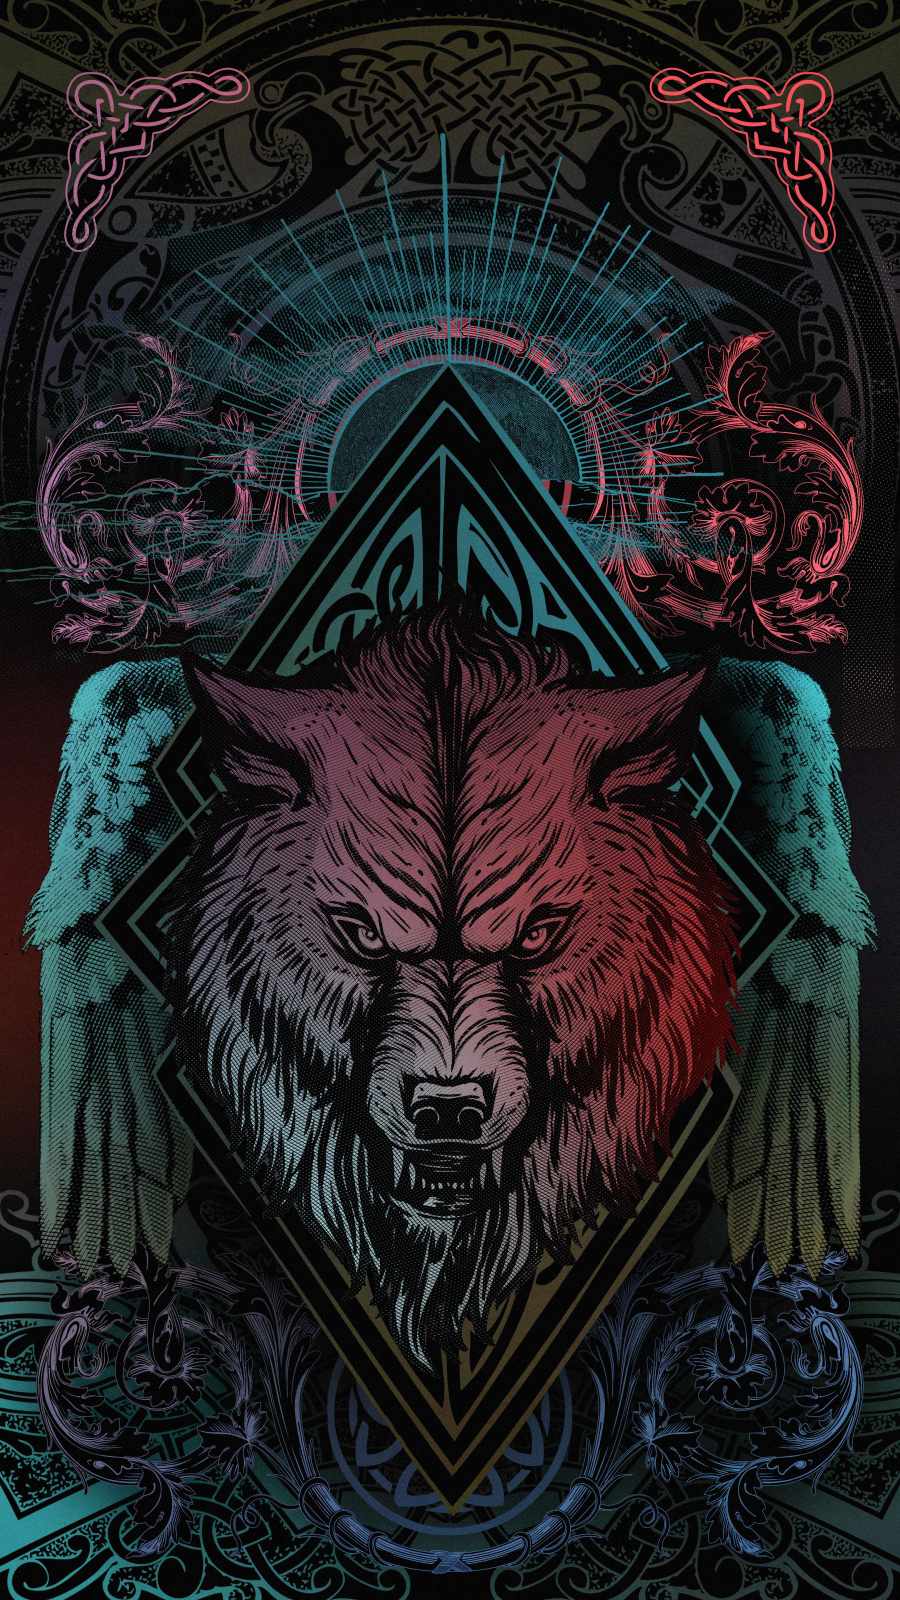 The Beast Art IPhone Wallpaper - IPhone Wallpapers : iPhone Wallpapers